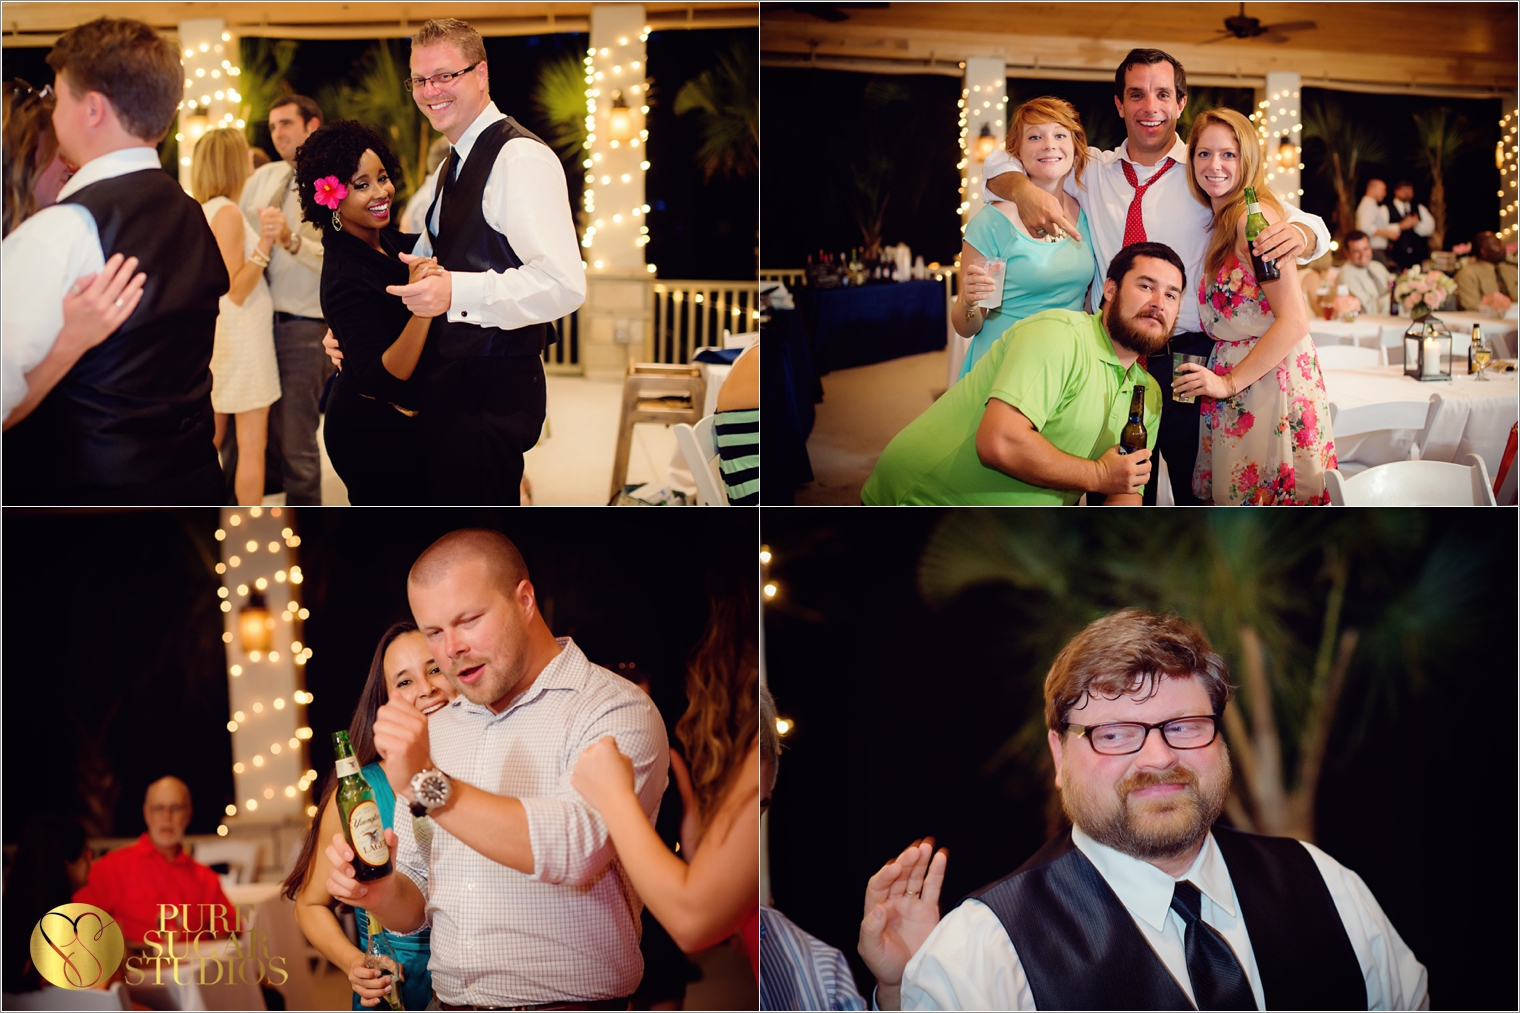 Pure Sugar Studios_St augustine wedding Photography_fountain of youth__0360.jpg